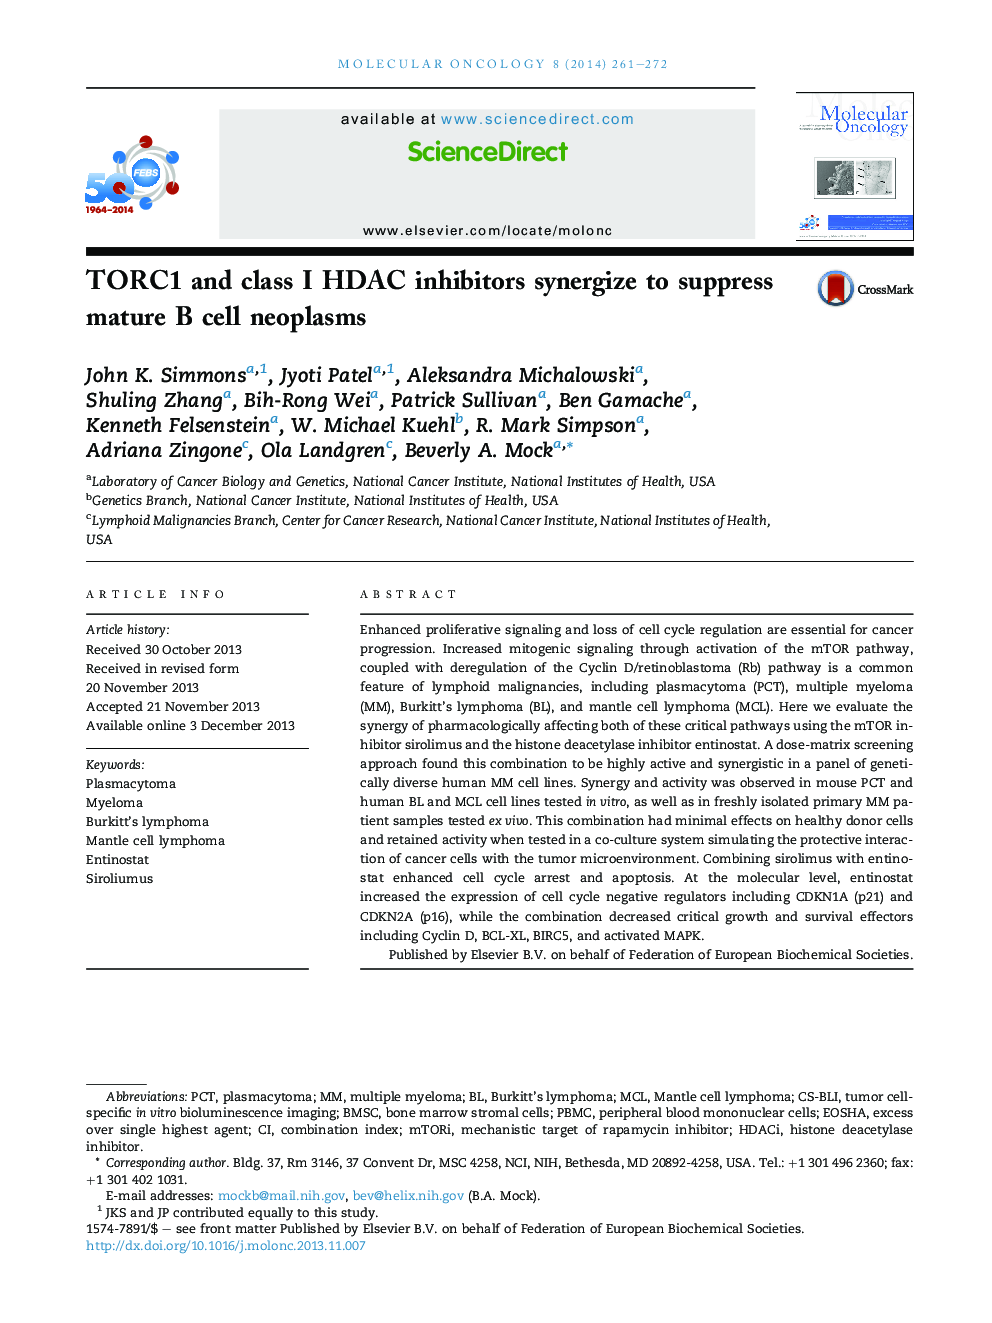 TORC1 and class I HDAC inhibitors synergize to suppress mature B cell neoplasms